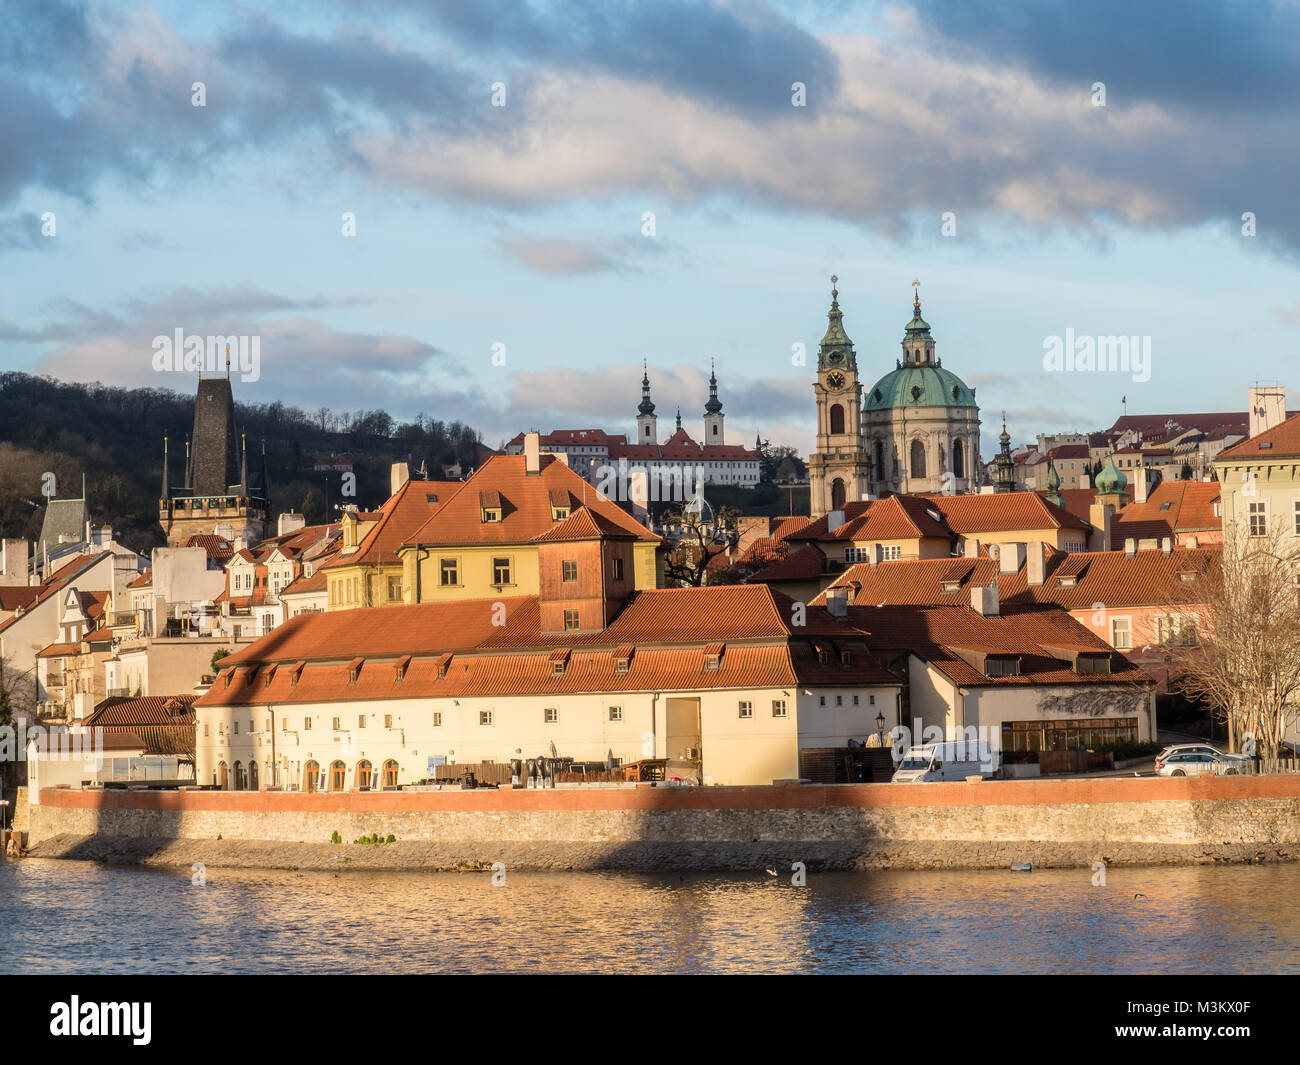 Church of Our Lady Victorious, the Strahov Monastery and Church of St. Nicholas, Prague, Czech republic Stock Photo